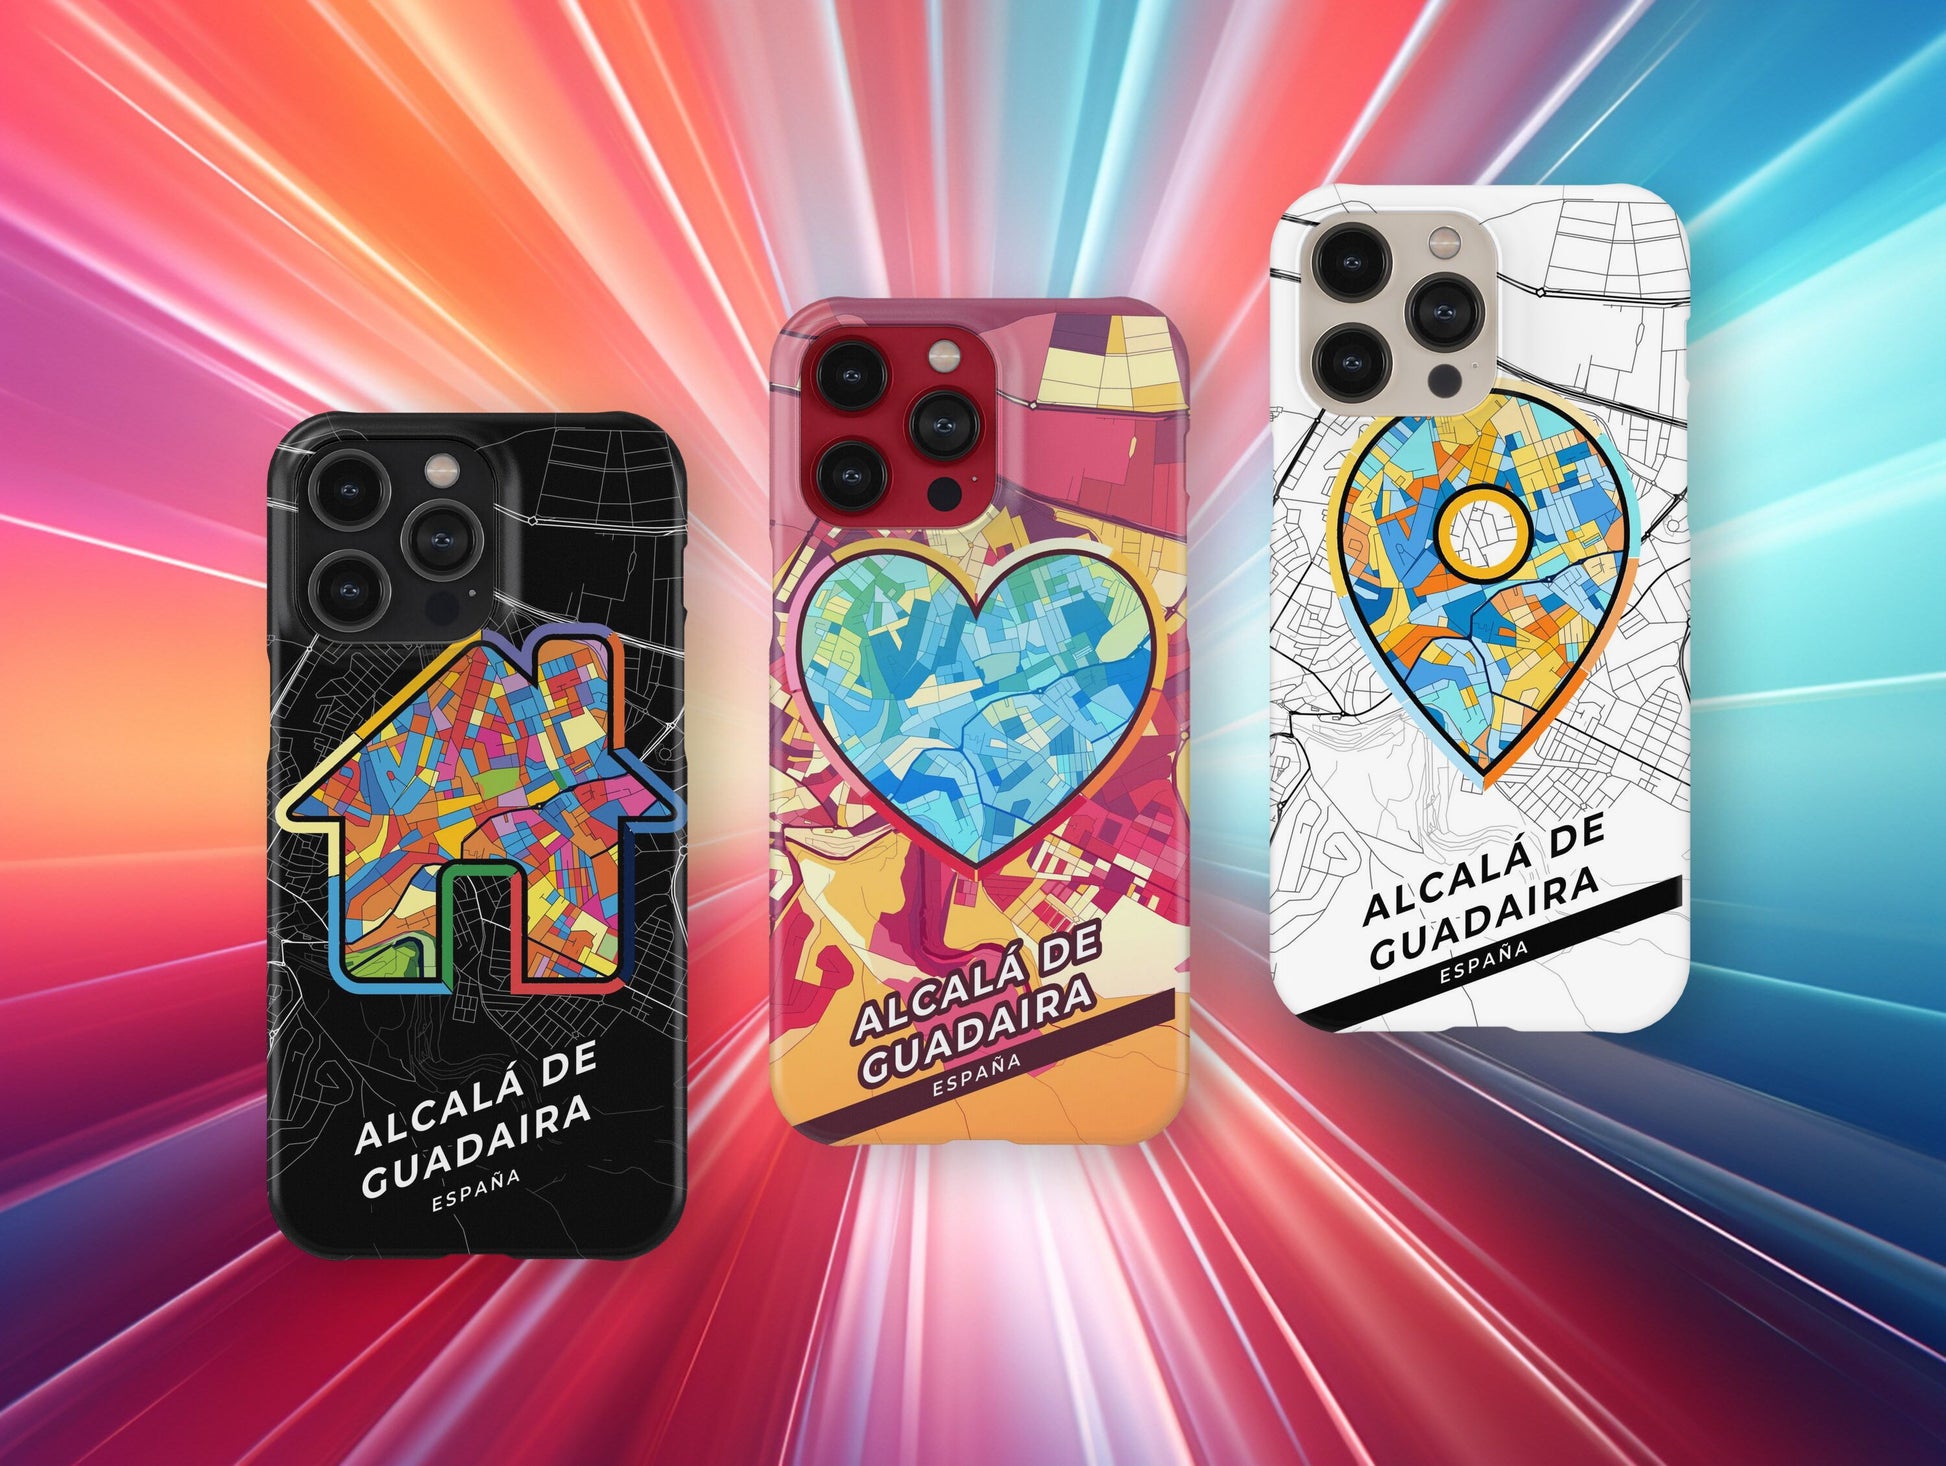 Alcalá De Guadaira Spain slim phone case with colorful icon. Birthday, wedding or housewarming gift. Couple match cases.